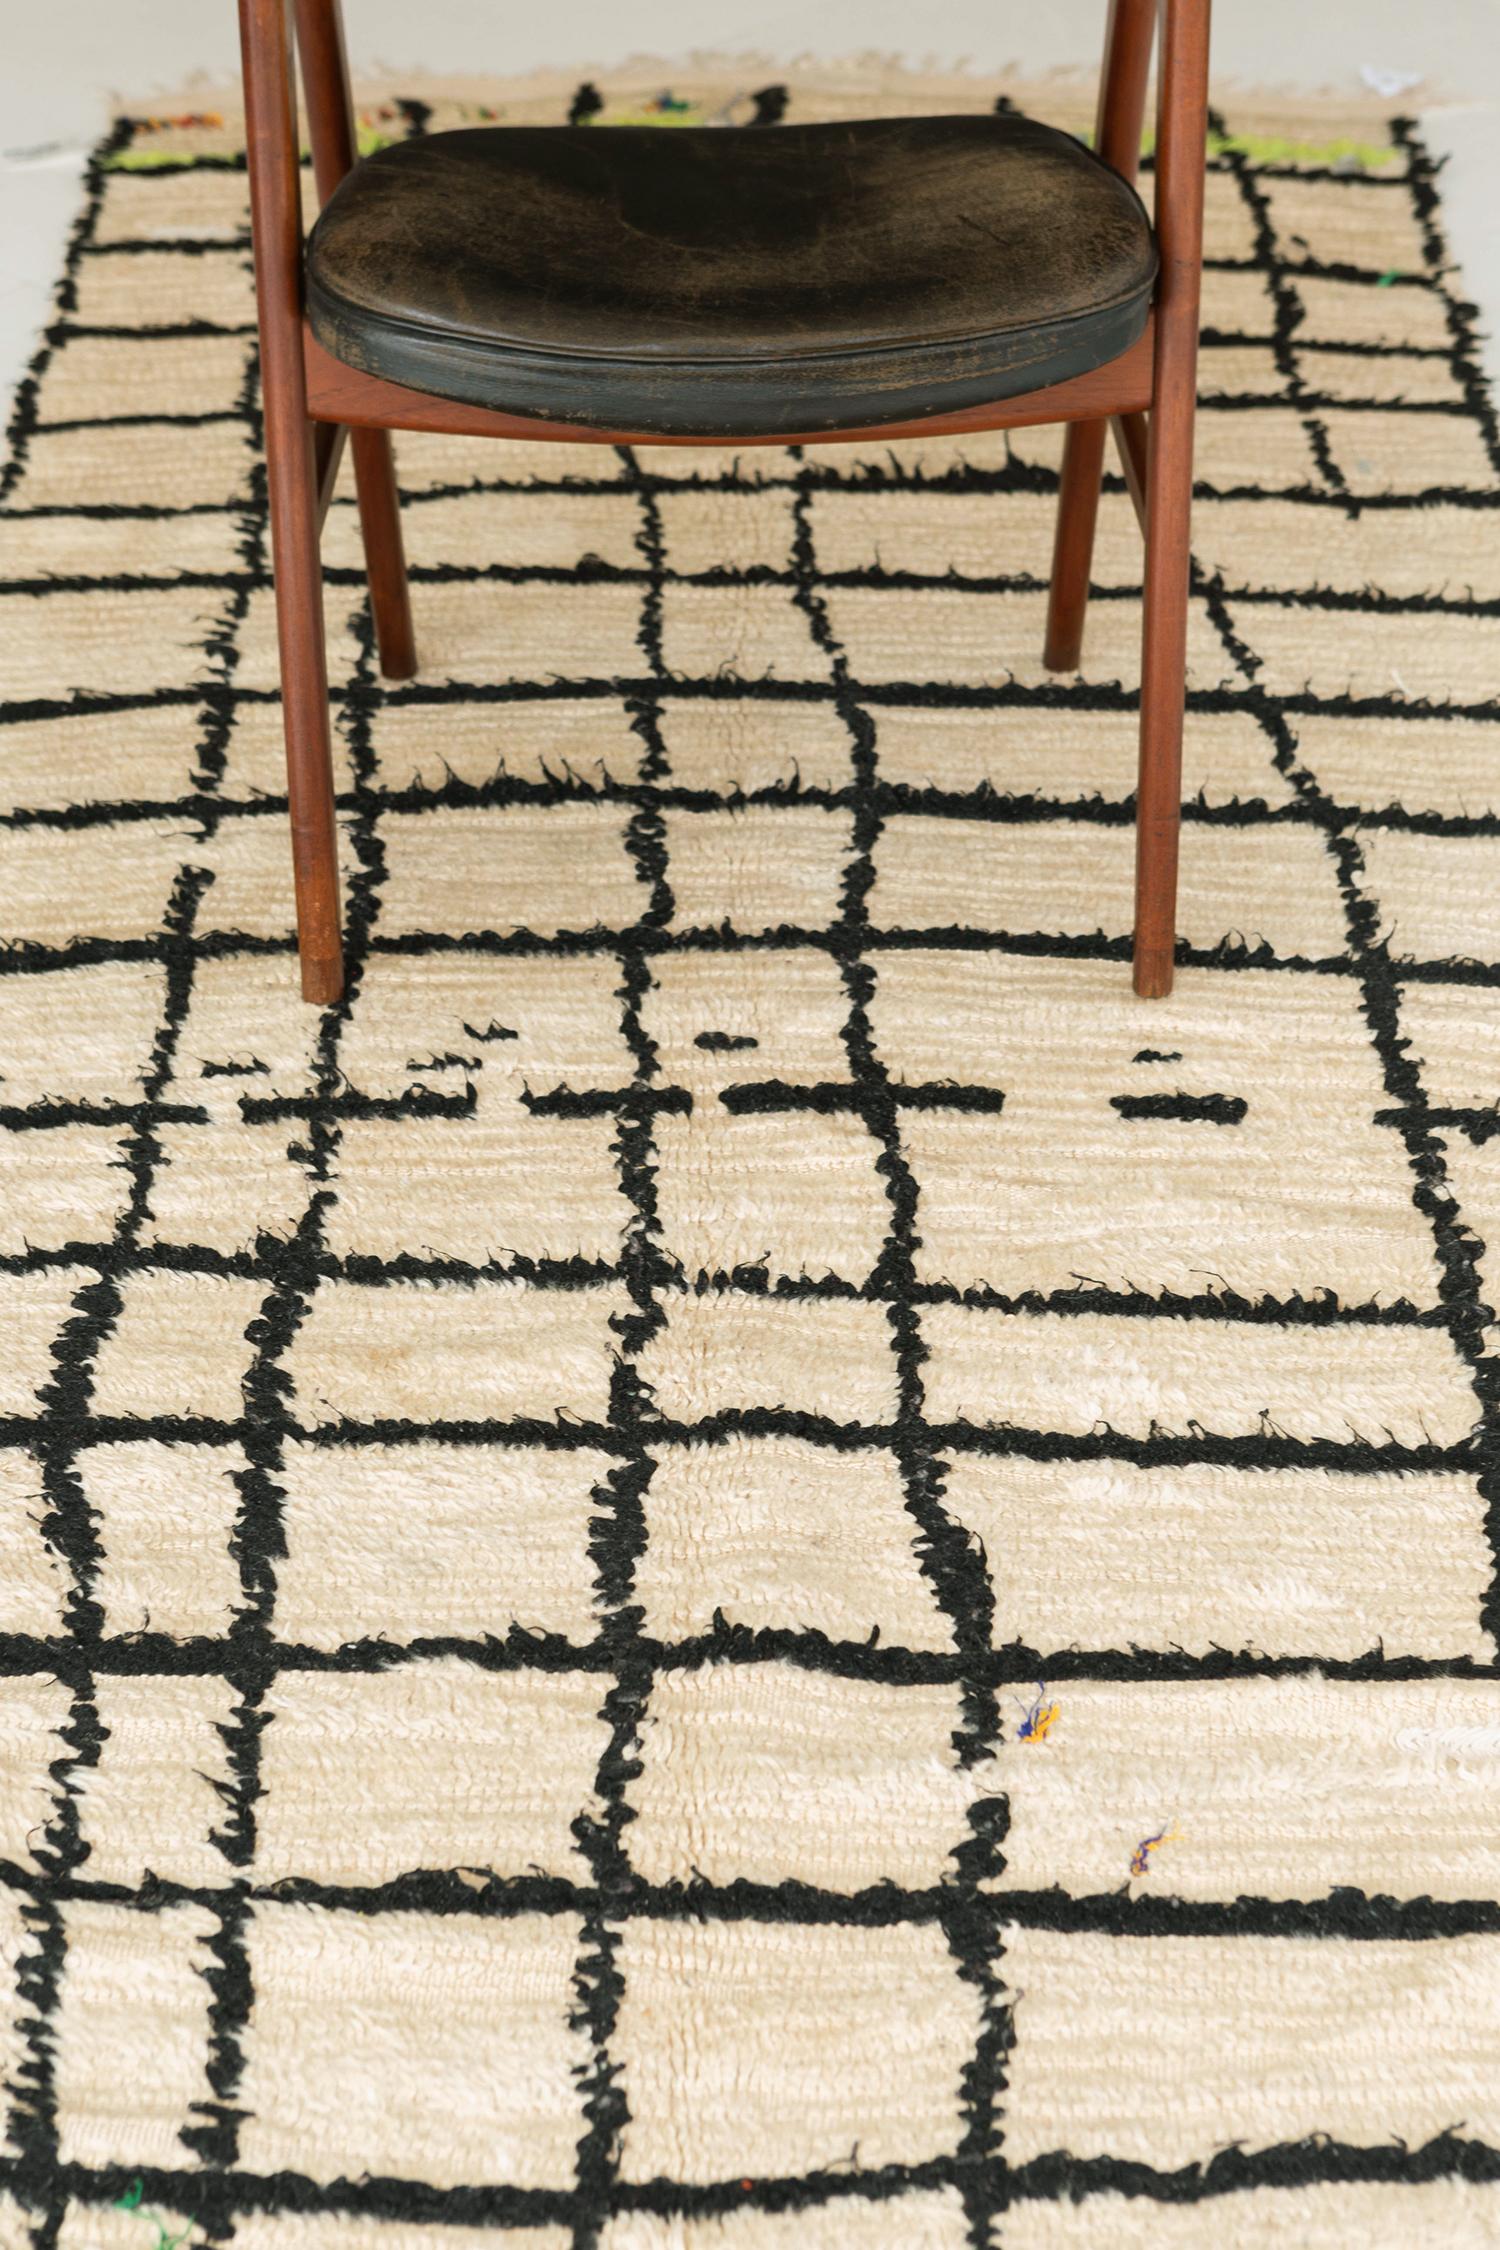 A classy but elegant pile woven rug from Morocco will complete your desired modern-chic bedroom interior. It has an asymmetric square pattern in a dark and light field that will make an eclectic theme. It will be the perfect rug for your bedroom